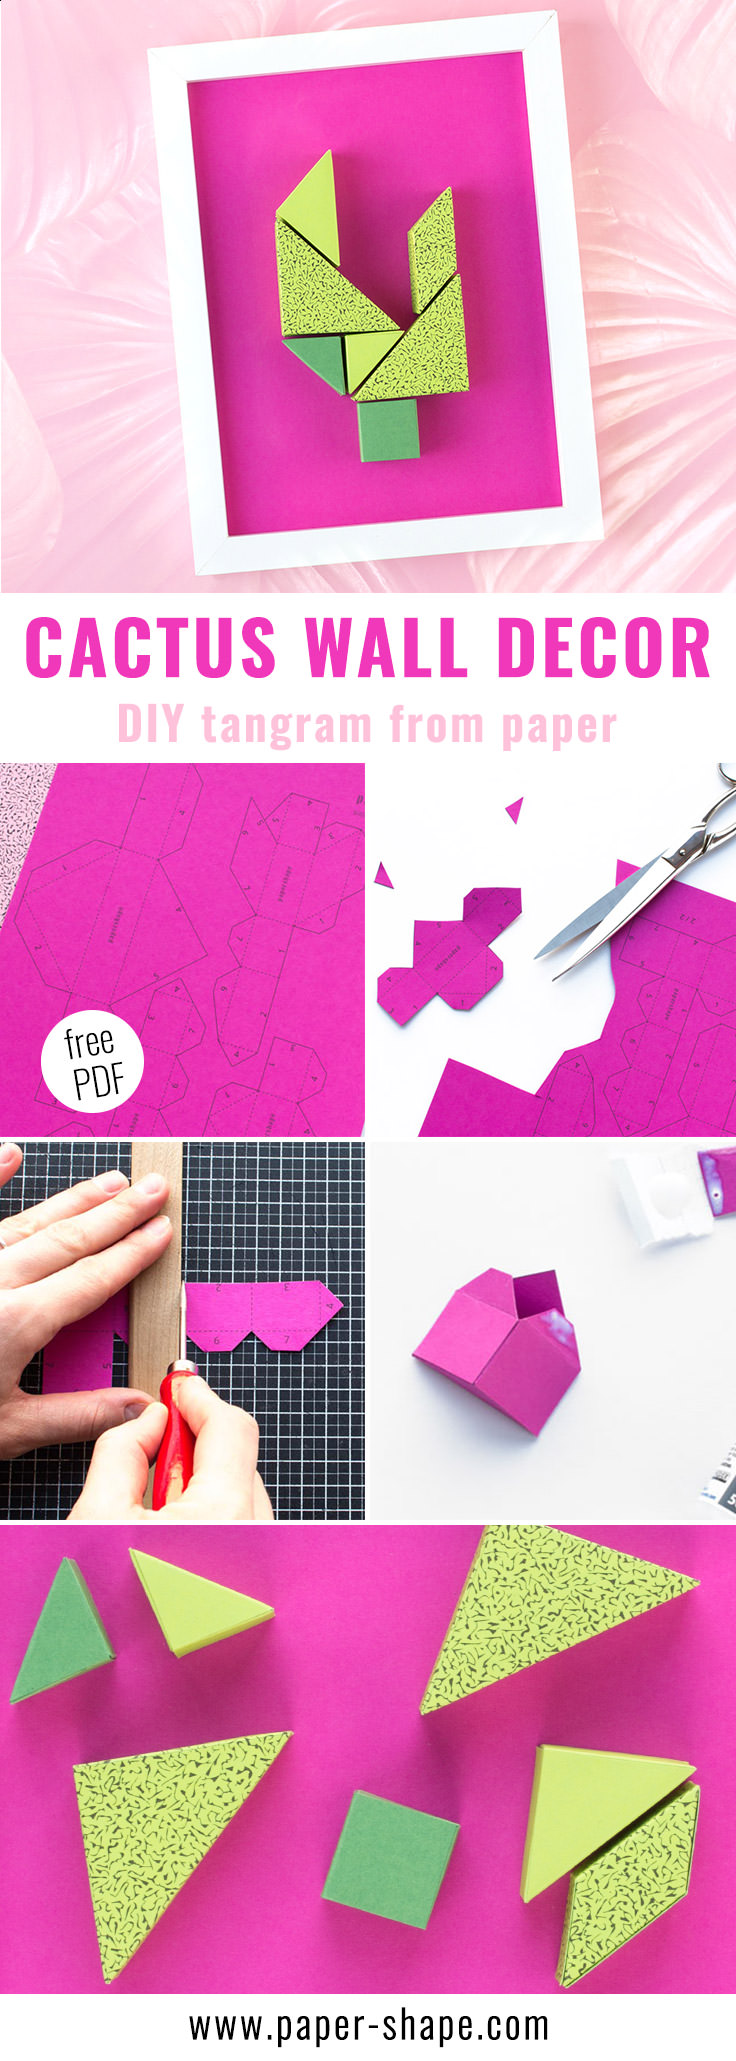 DIY wall decor from paper (free printable): tangram cactus in fancy colors /PaperShape #papershape #walldecor #diy #paper 